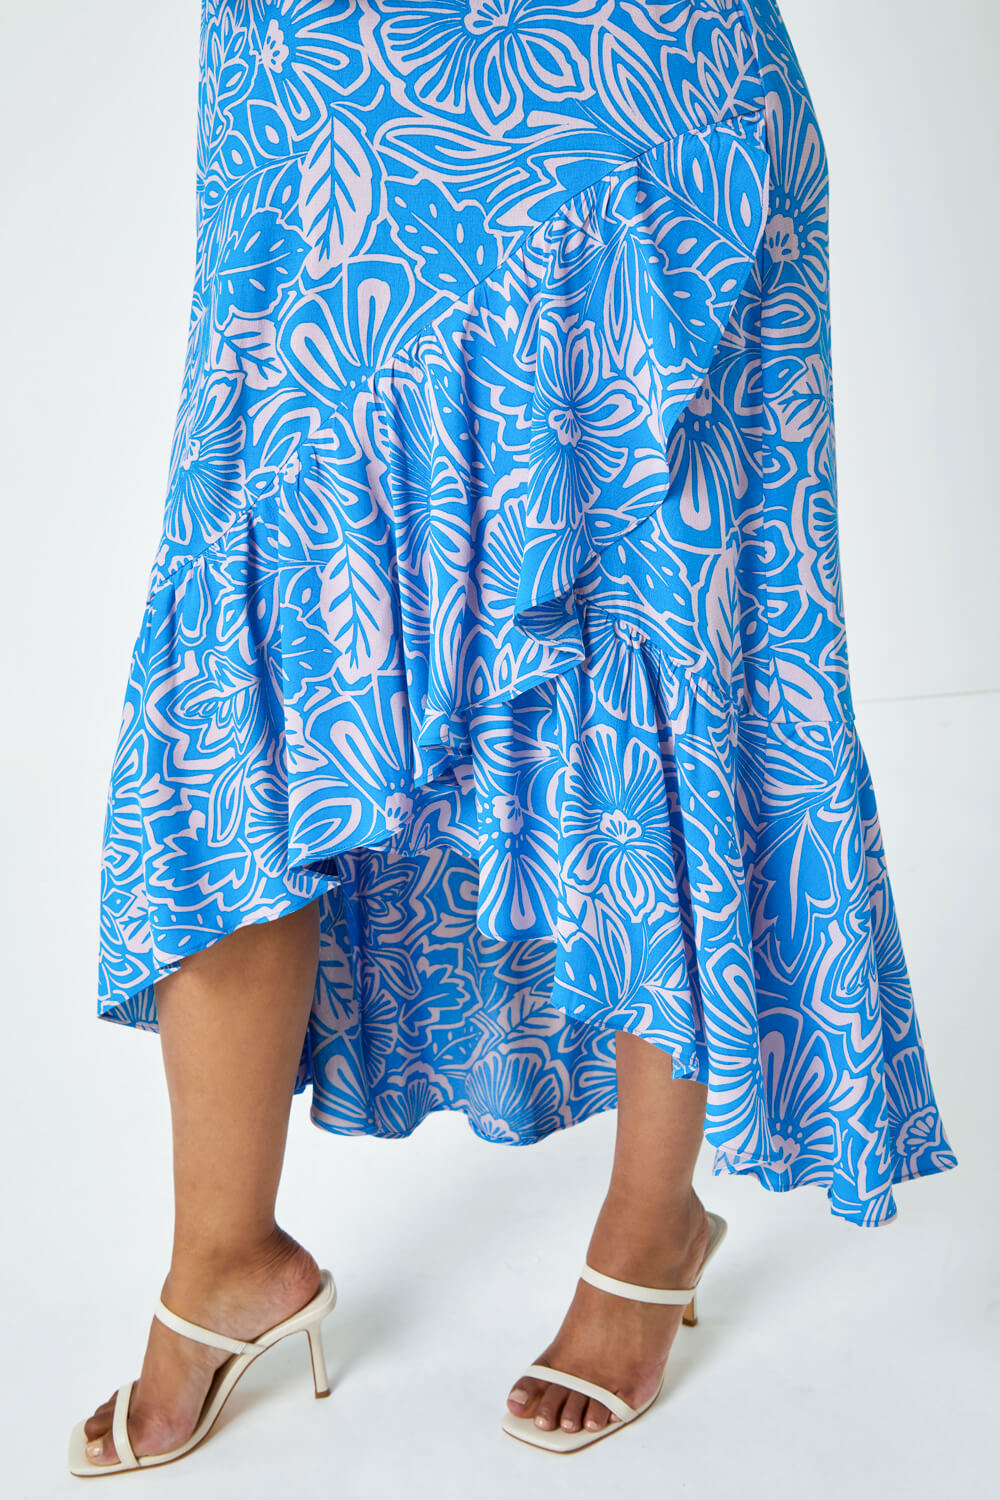 Blue Petite Floral Print Ruched Midi Dress, Image 5 of 5